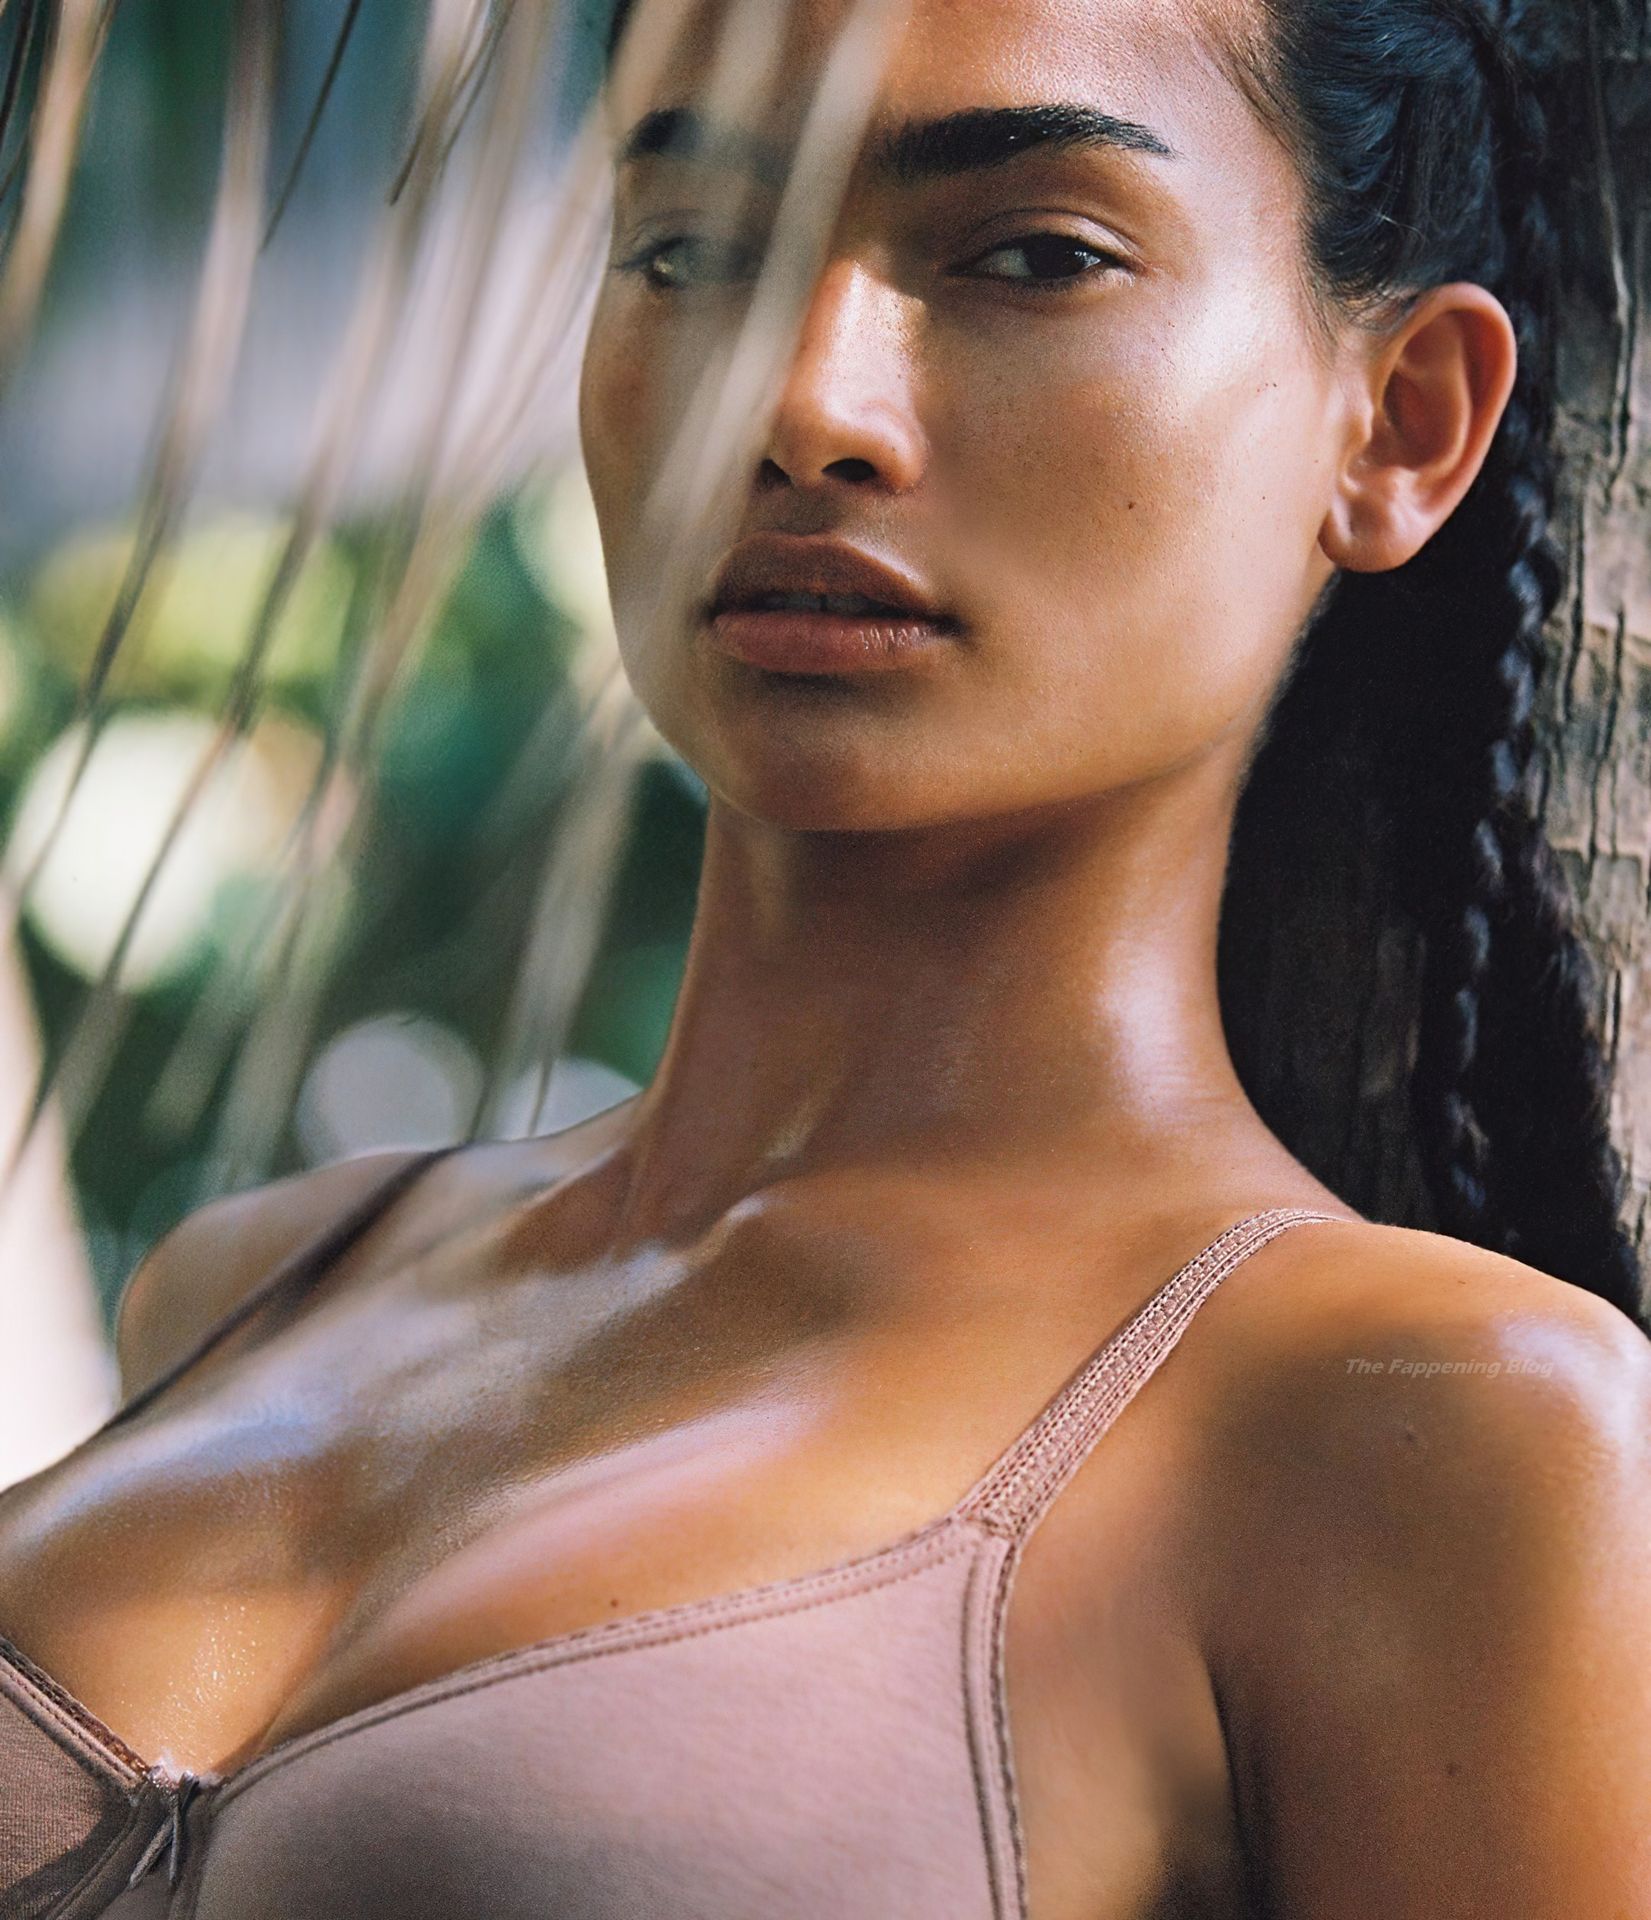 cao kelly gale thanh doanh nam